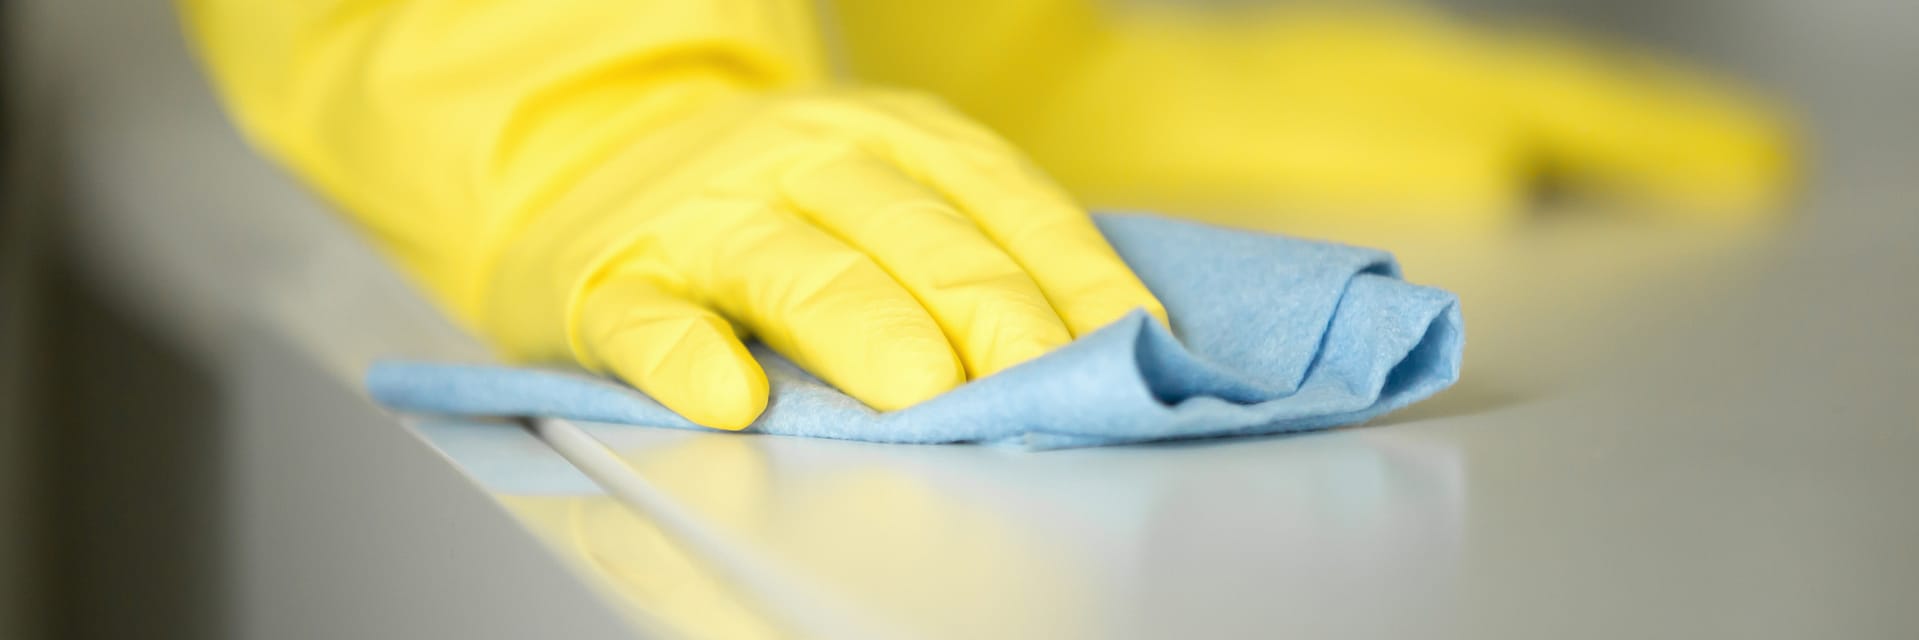 a hand in a rubber glove is cleaning a surface with a blue piece of cloth.